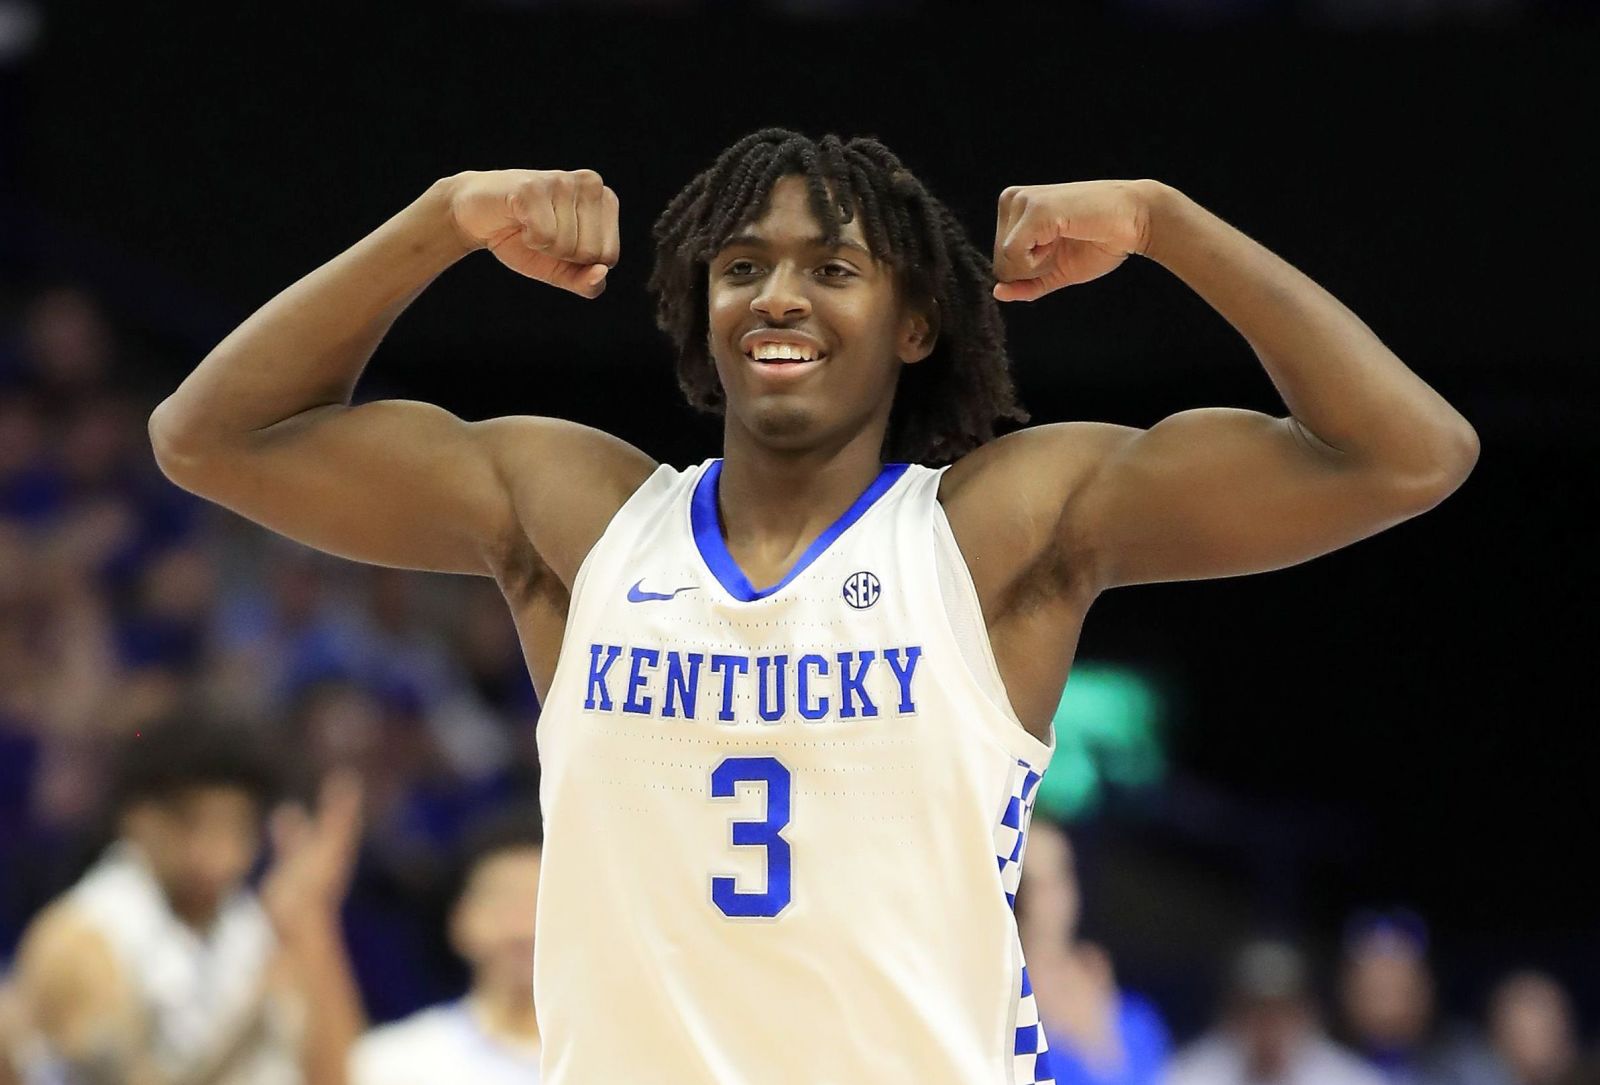 NBA Draft 2020 re-draft: Tyrese Maxey rises, Sixers target another guard